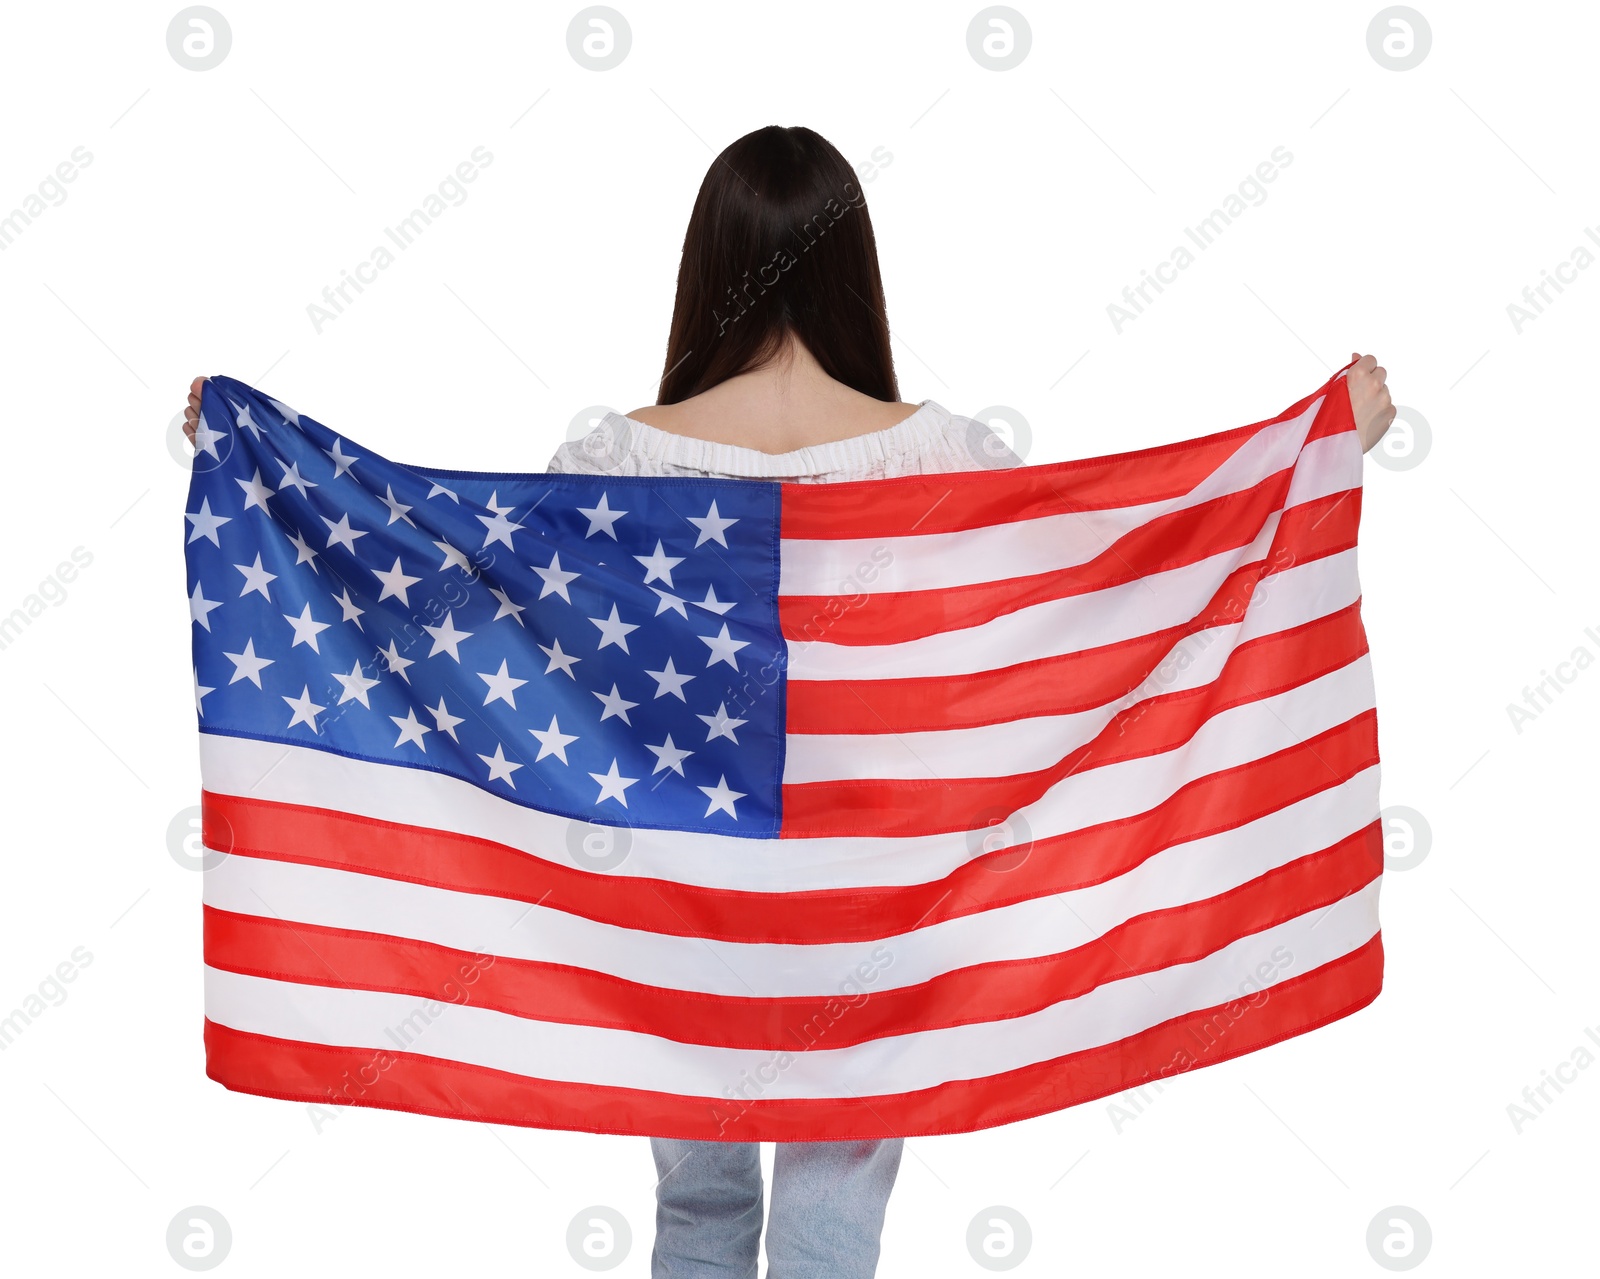 Image of 4th of July - Independence day of America. Girl holding national flag of United States on white background